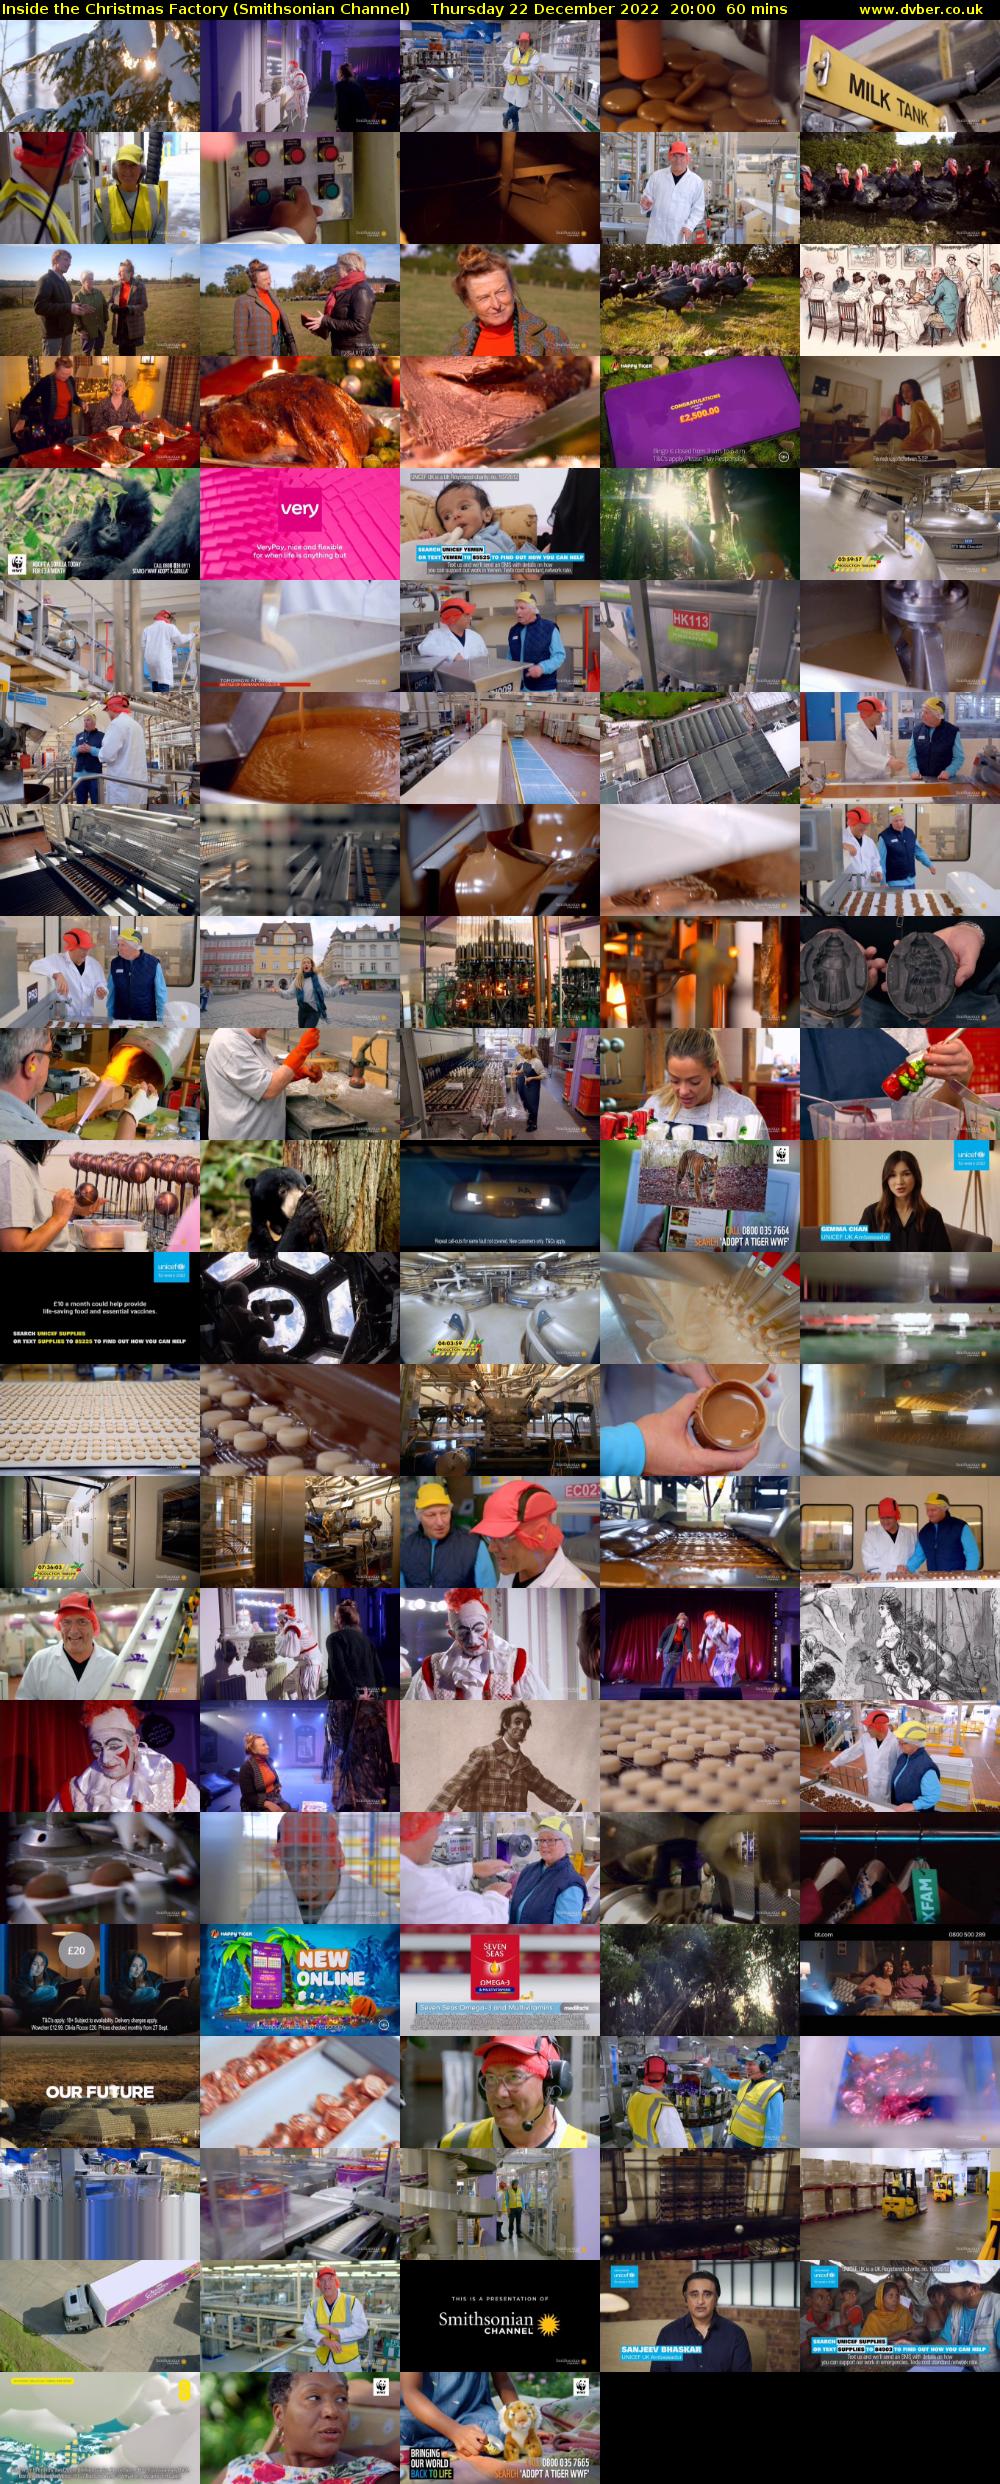 Inside The Christmas Factory (Smithsonian Channel) Thursday 22 December 2022 20:00 - 21:00